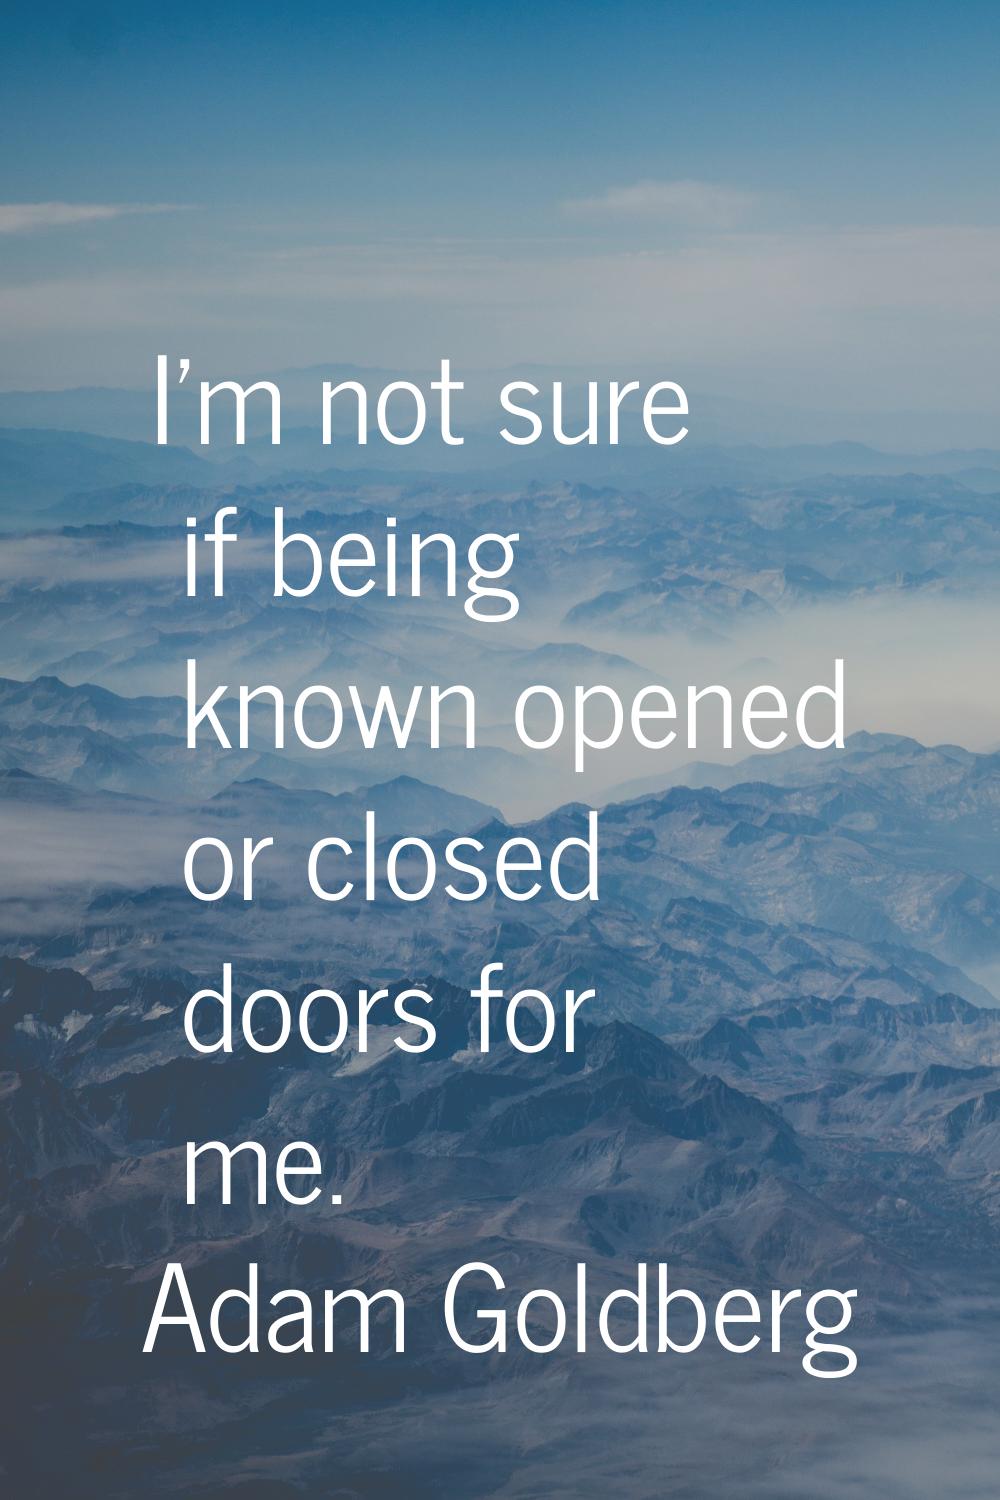 I'm not sure if being known opened or closed doors for me.